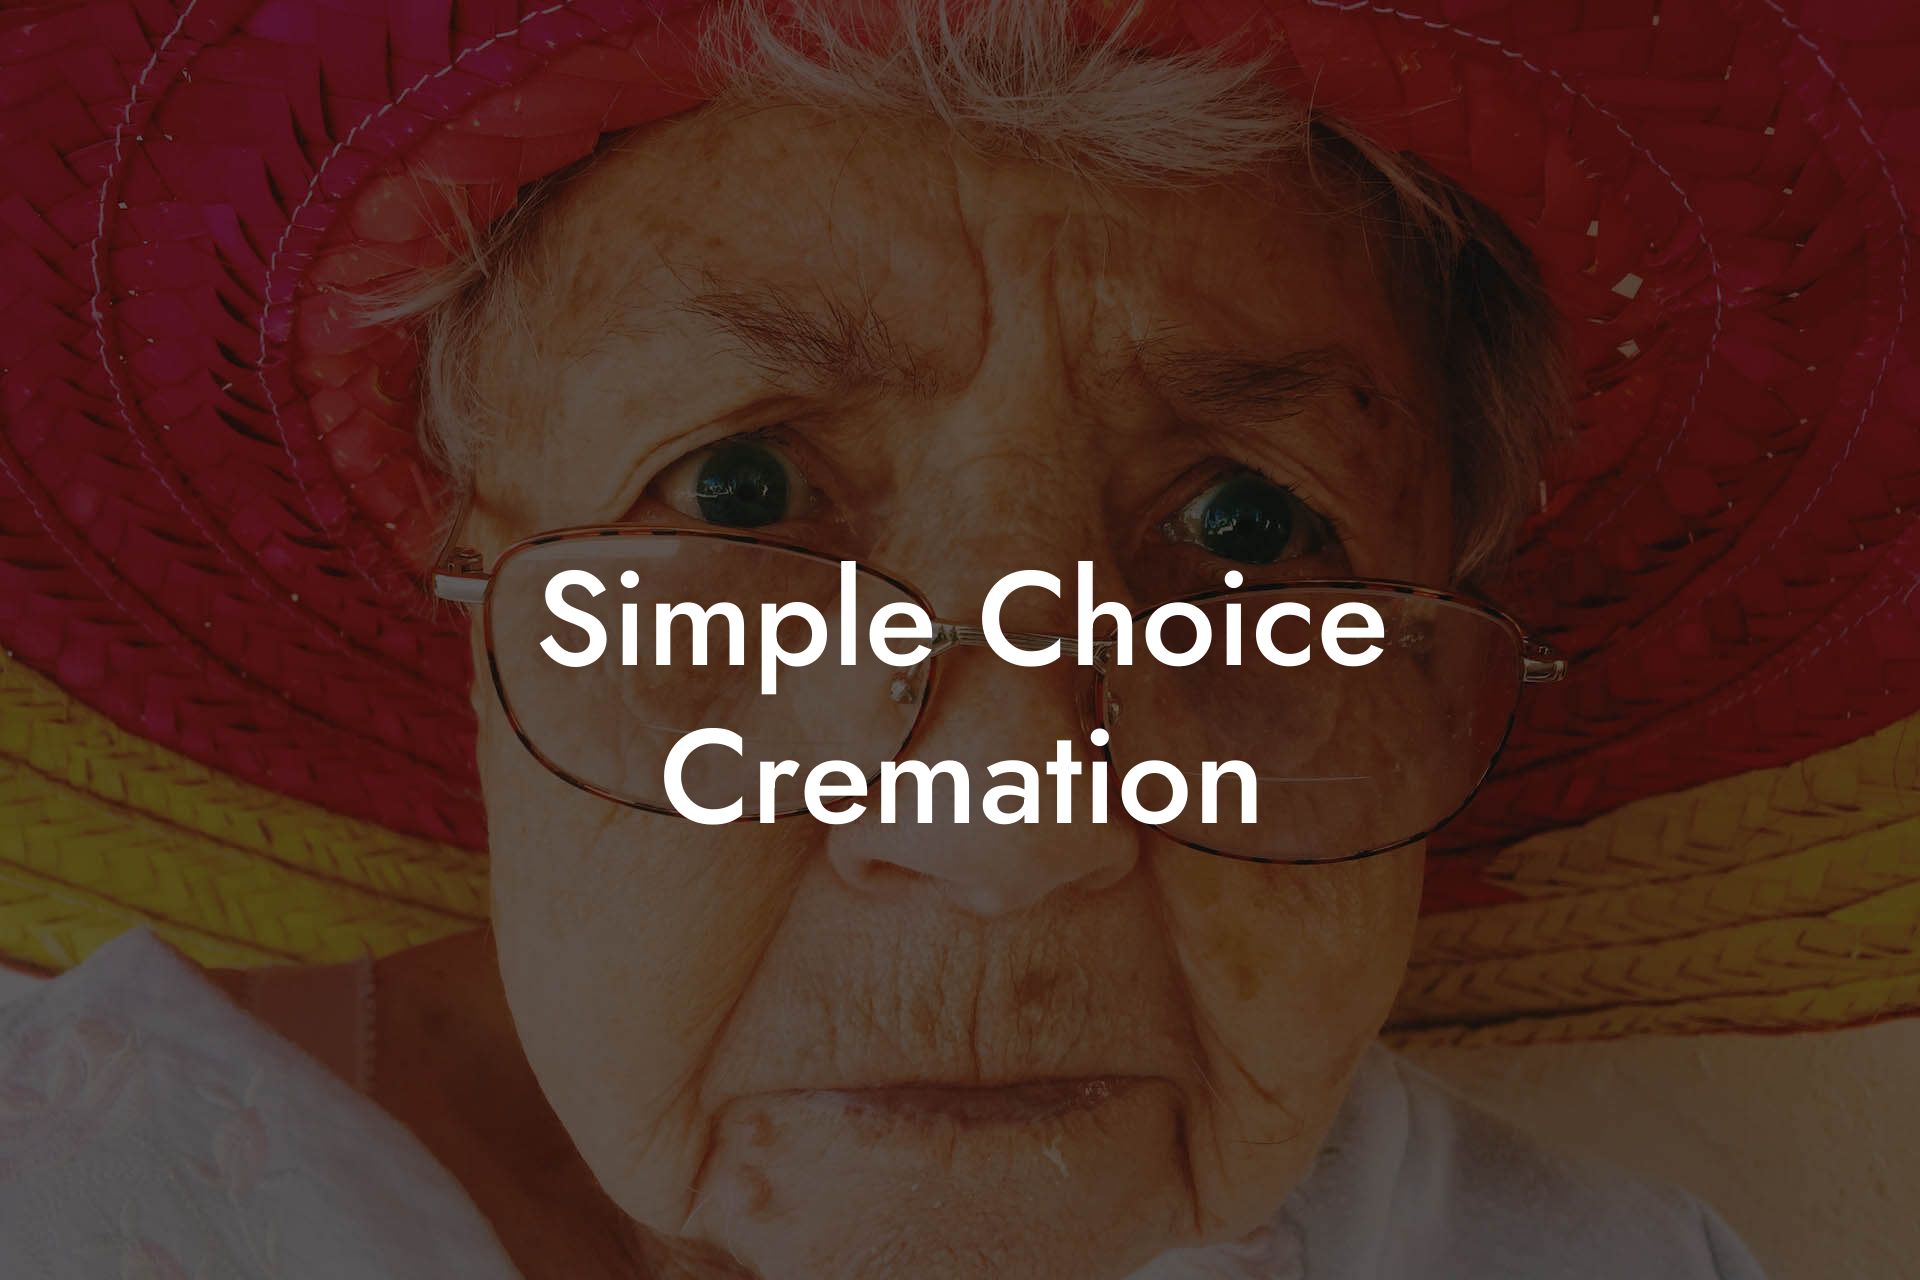 Simple Choice Cremation